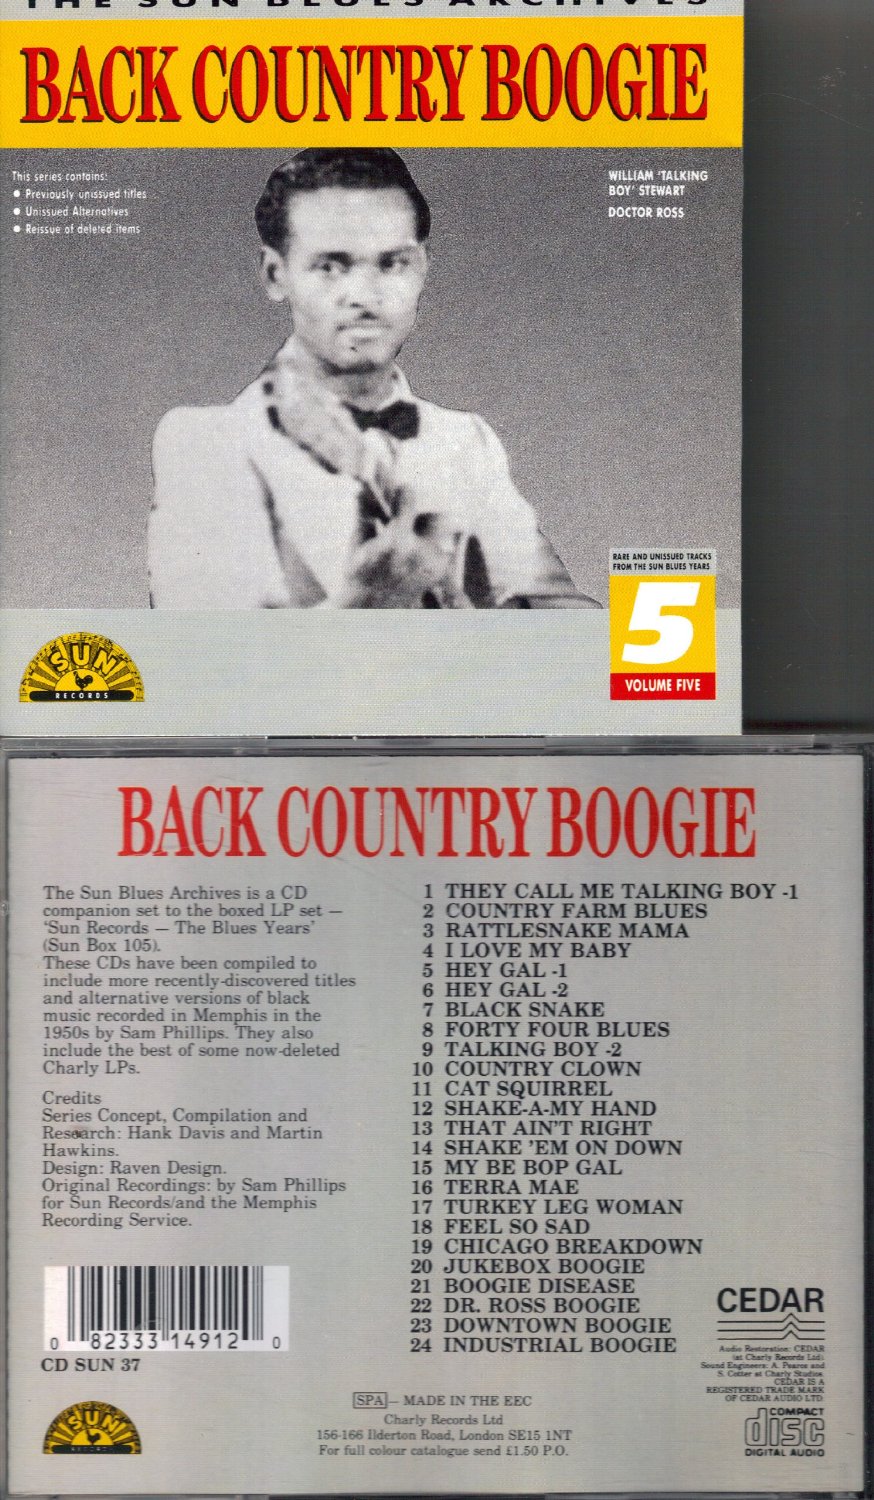 Back Country Boogie: The Sun Blues Archives, Rare and Unissued Tracks From the Sun Blues Years, Vol. 5	